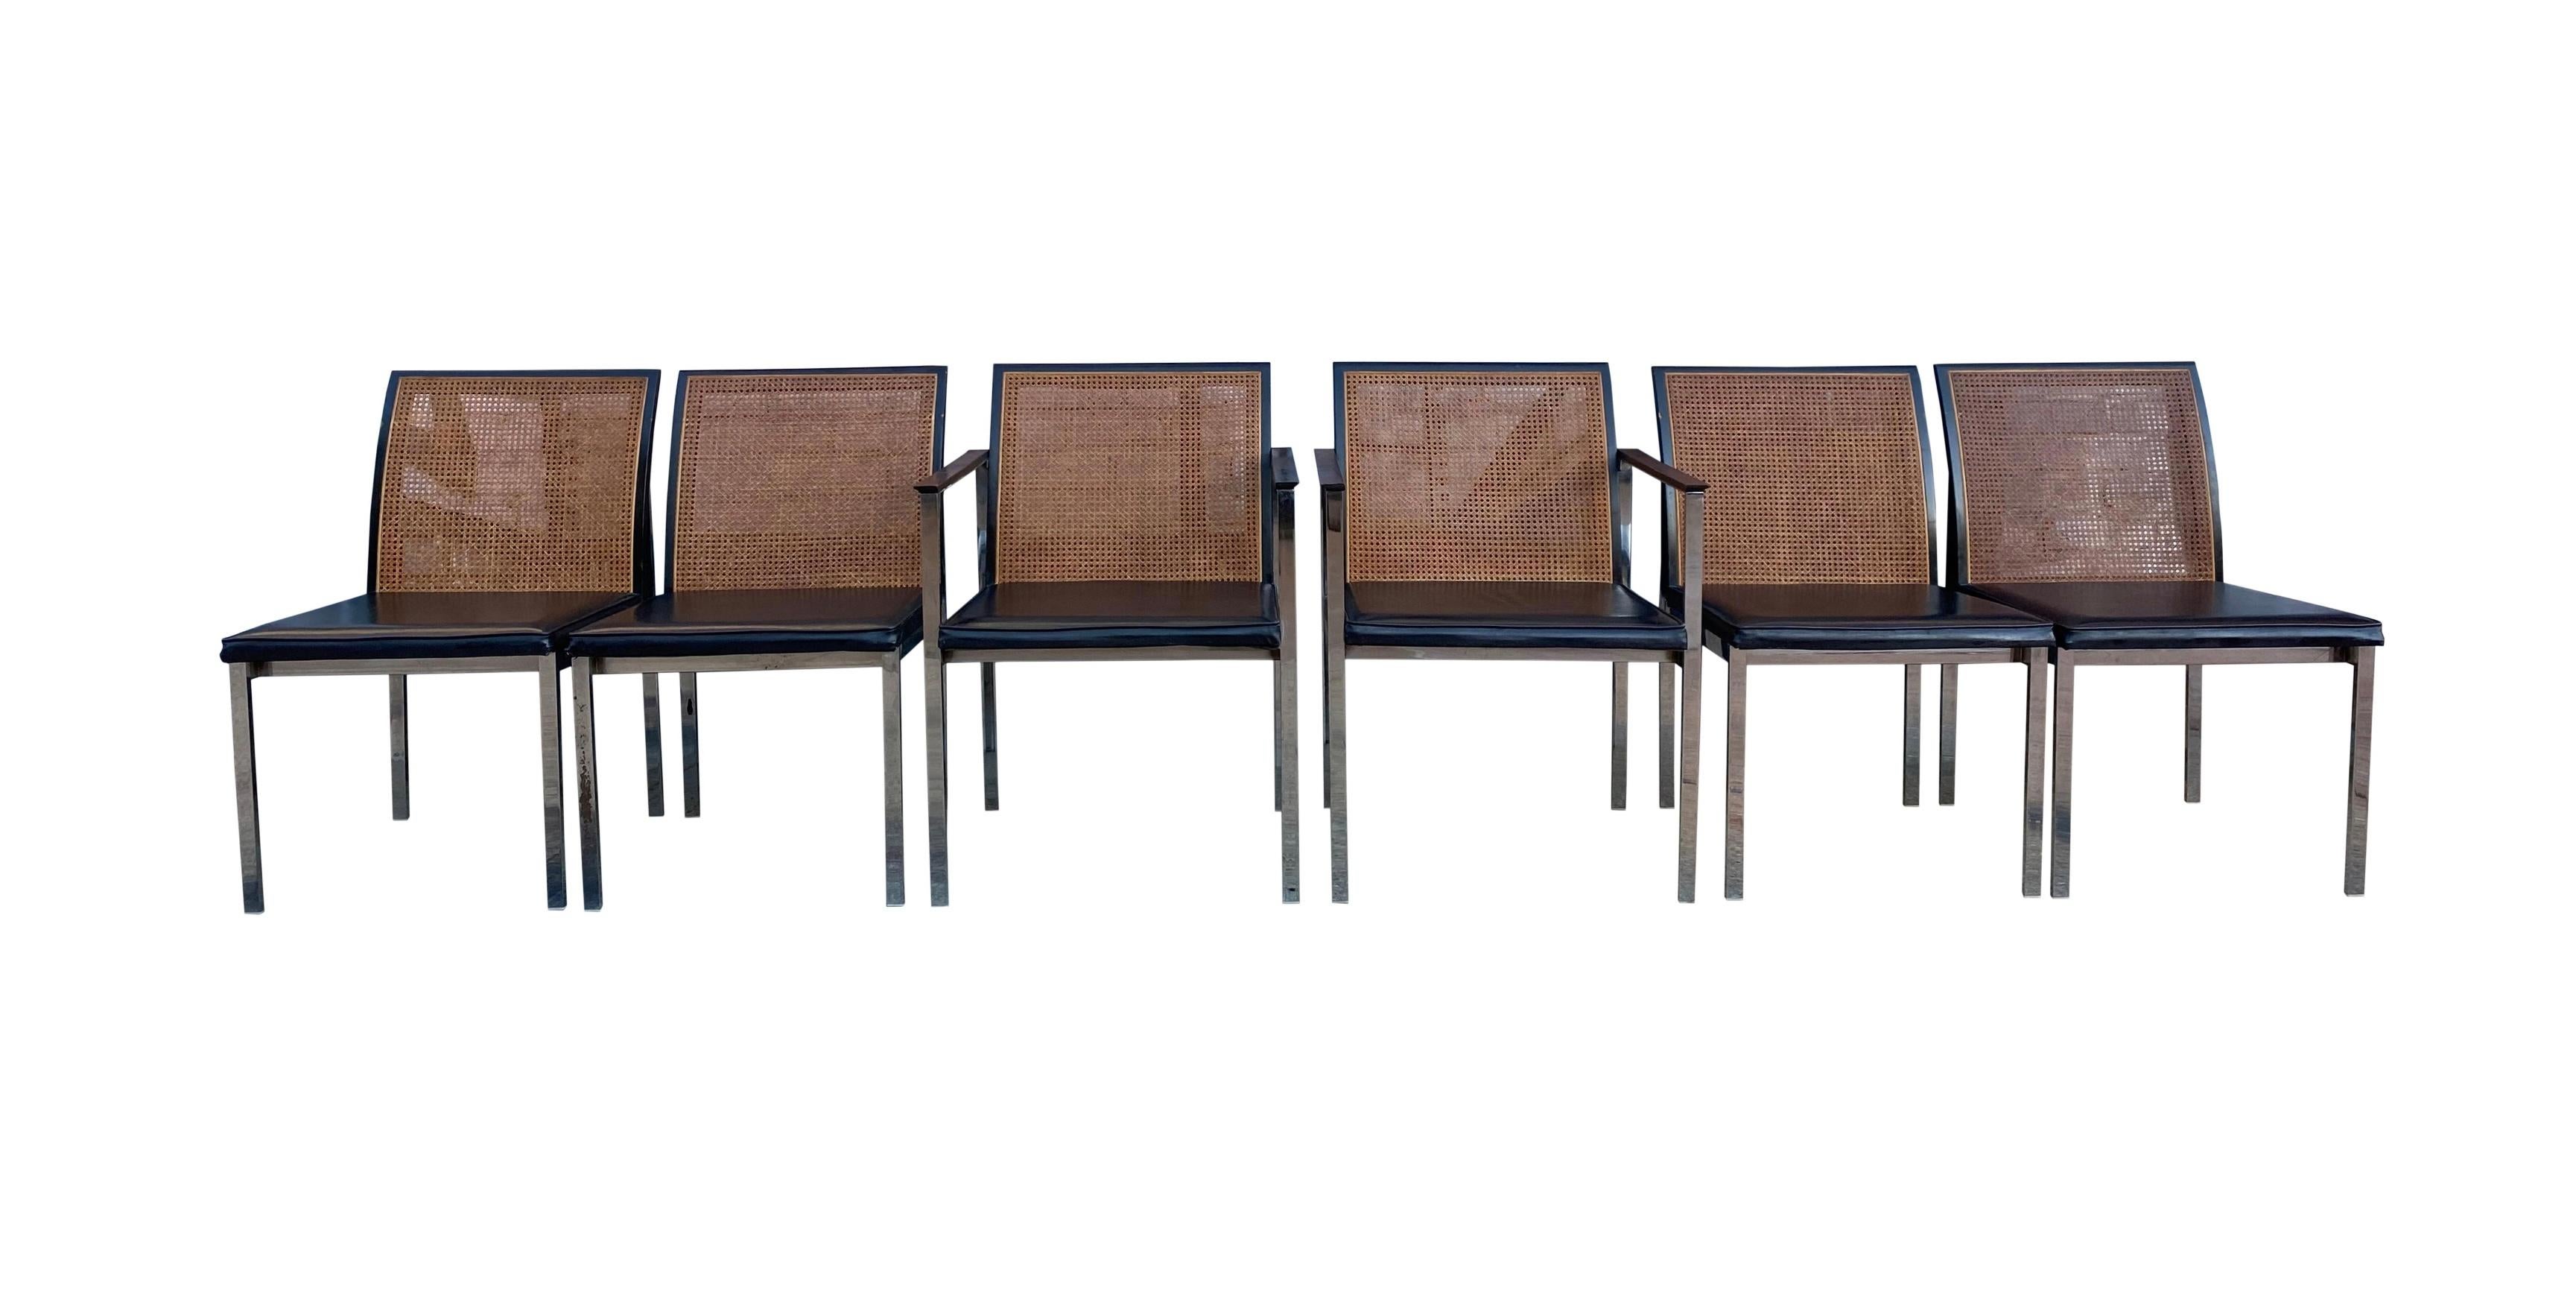 Six all original rare midcentury Paul McCobb for Lane chrome dining chairs. Solid chrome steel frames and curved cane back with original vinyl upholstered cushion. Original vintage condition. Original black lacquer finish. (2) Armchairs have